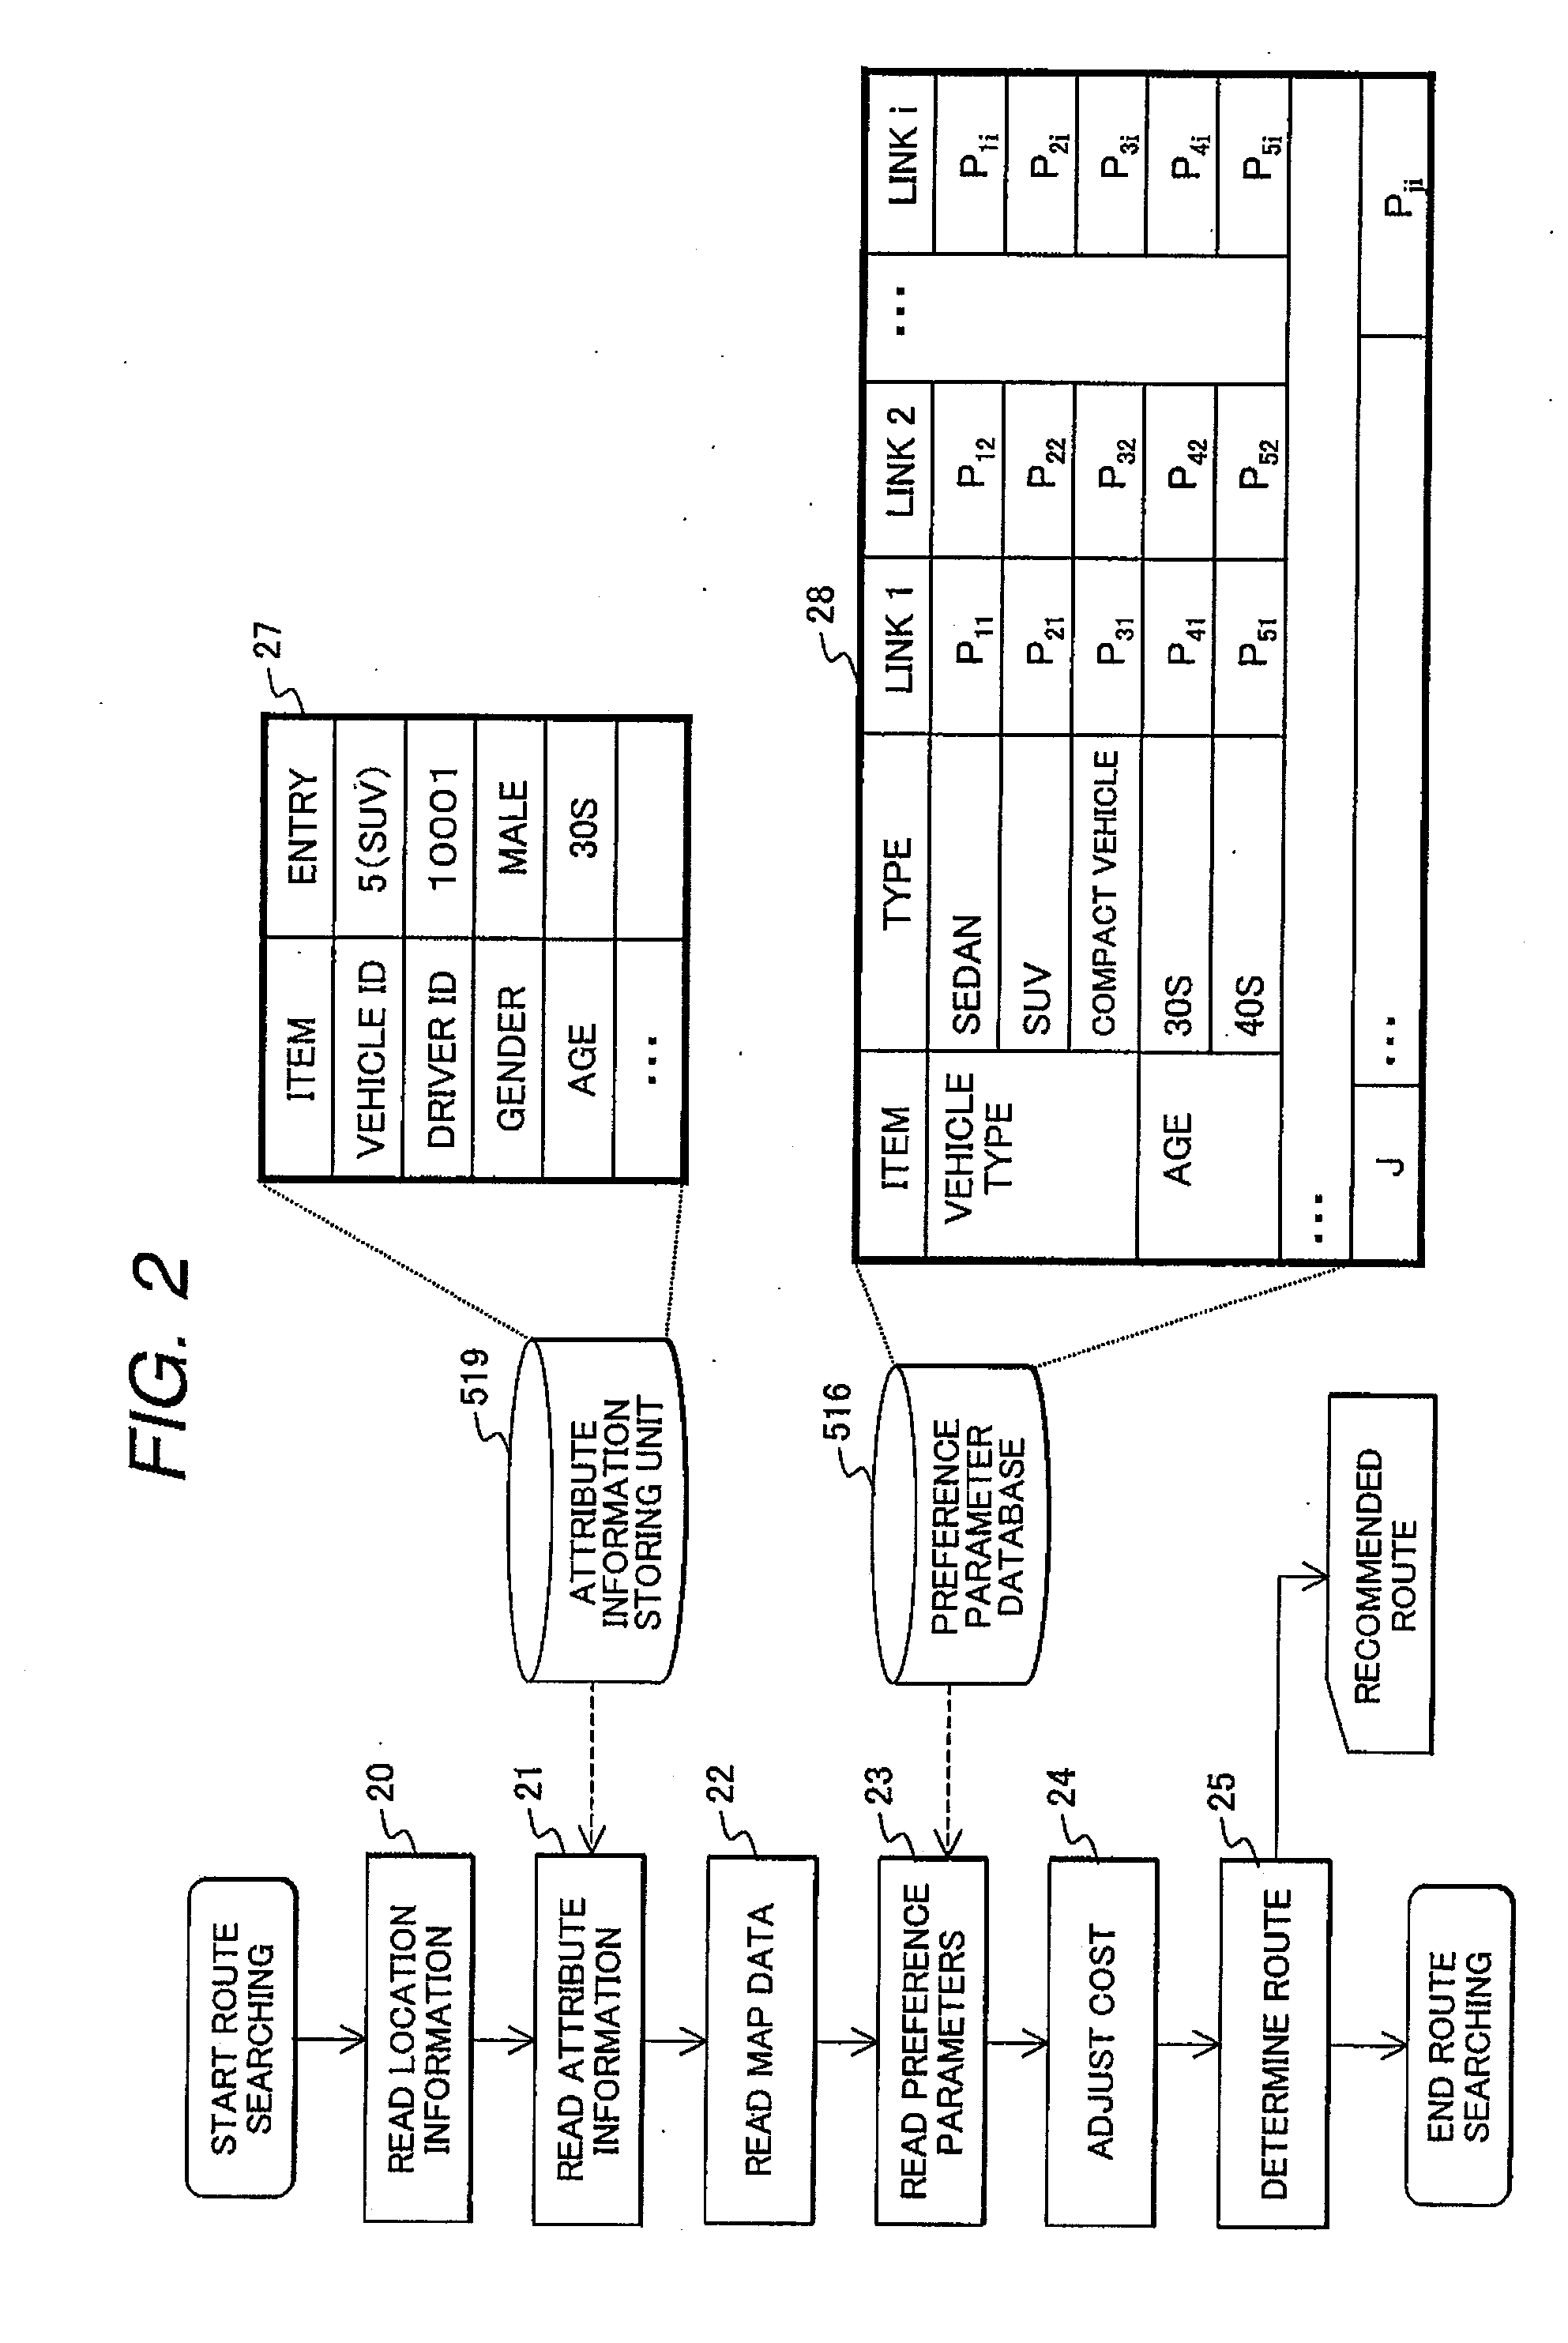 Method and System for Route Searching, and Navigation Apparatus Using the Same